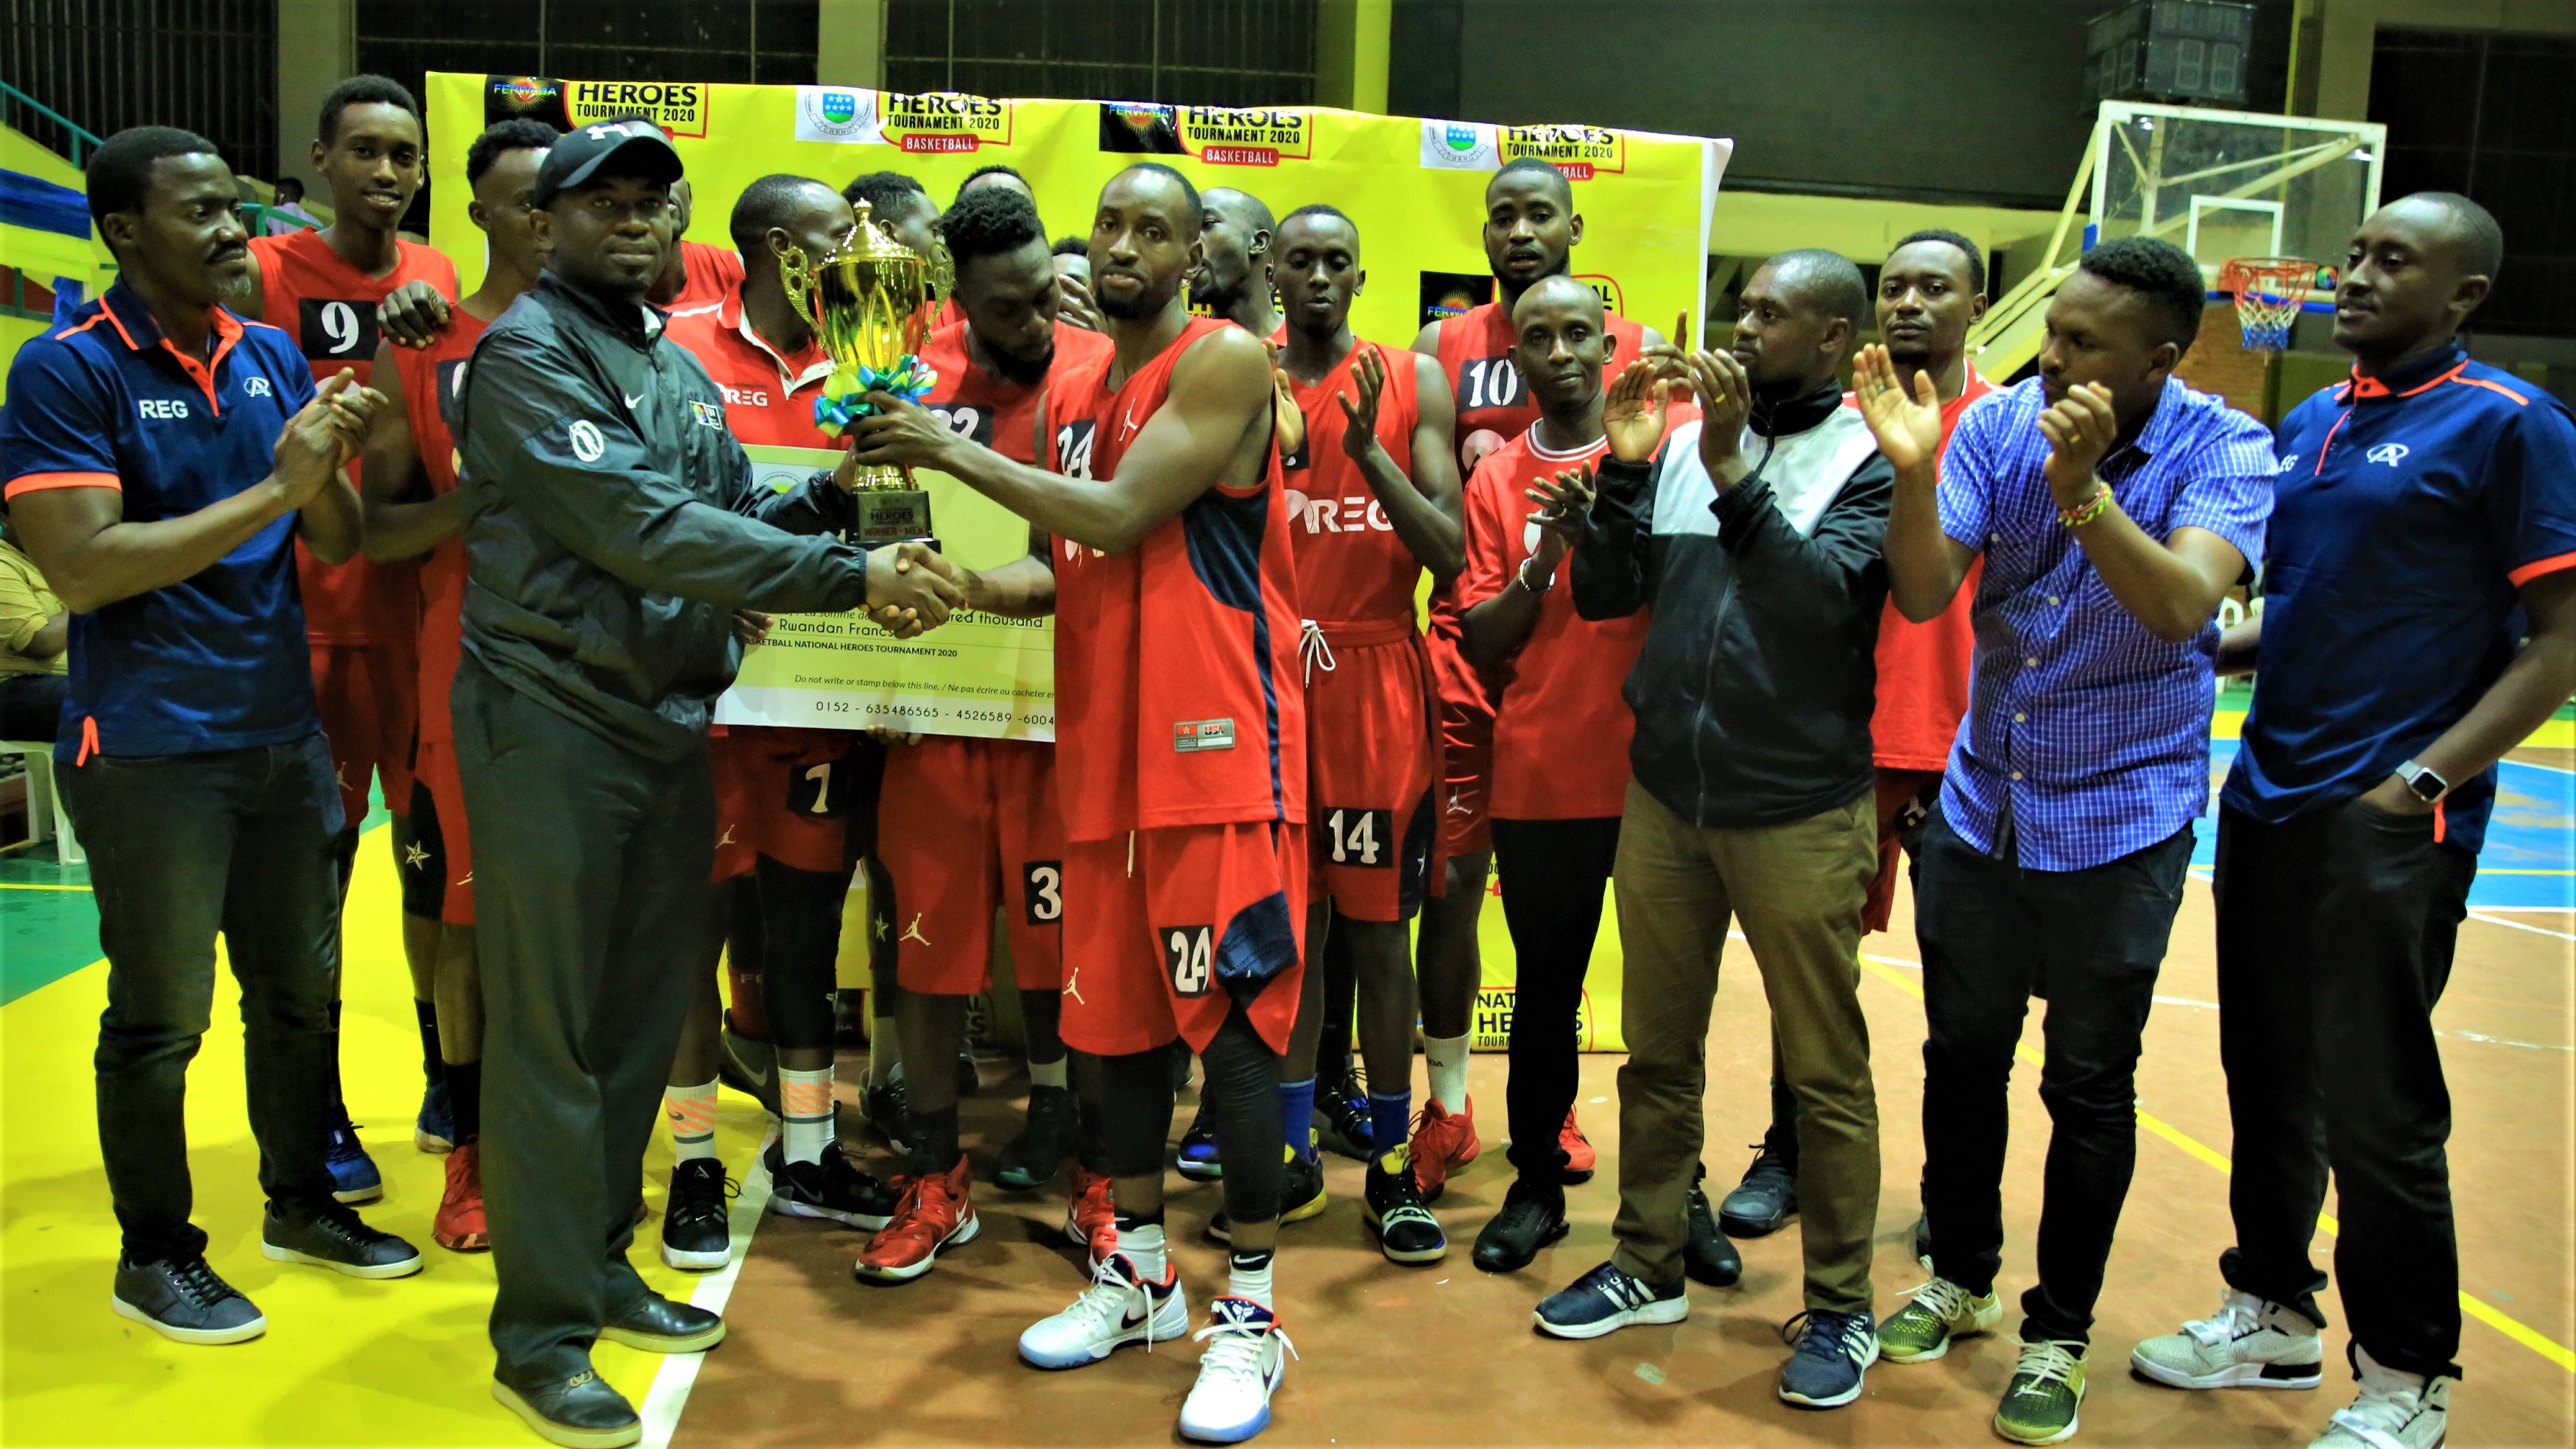 Didier Shema Maboko, Permanent Secretary of the Ministry for Sports, hands over the trophy to REG captain Ali Kubwimana Kazingufu as teammates and coaching staff in the background celebrated the milestone after beating APR 71-62 to retain the Heroes Cup for a third consecutive time at Amahoro Stadium on Sunday night. Photo: 